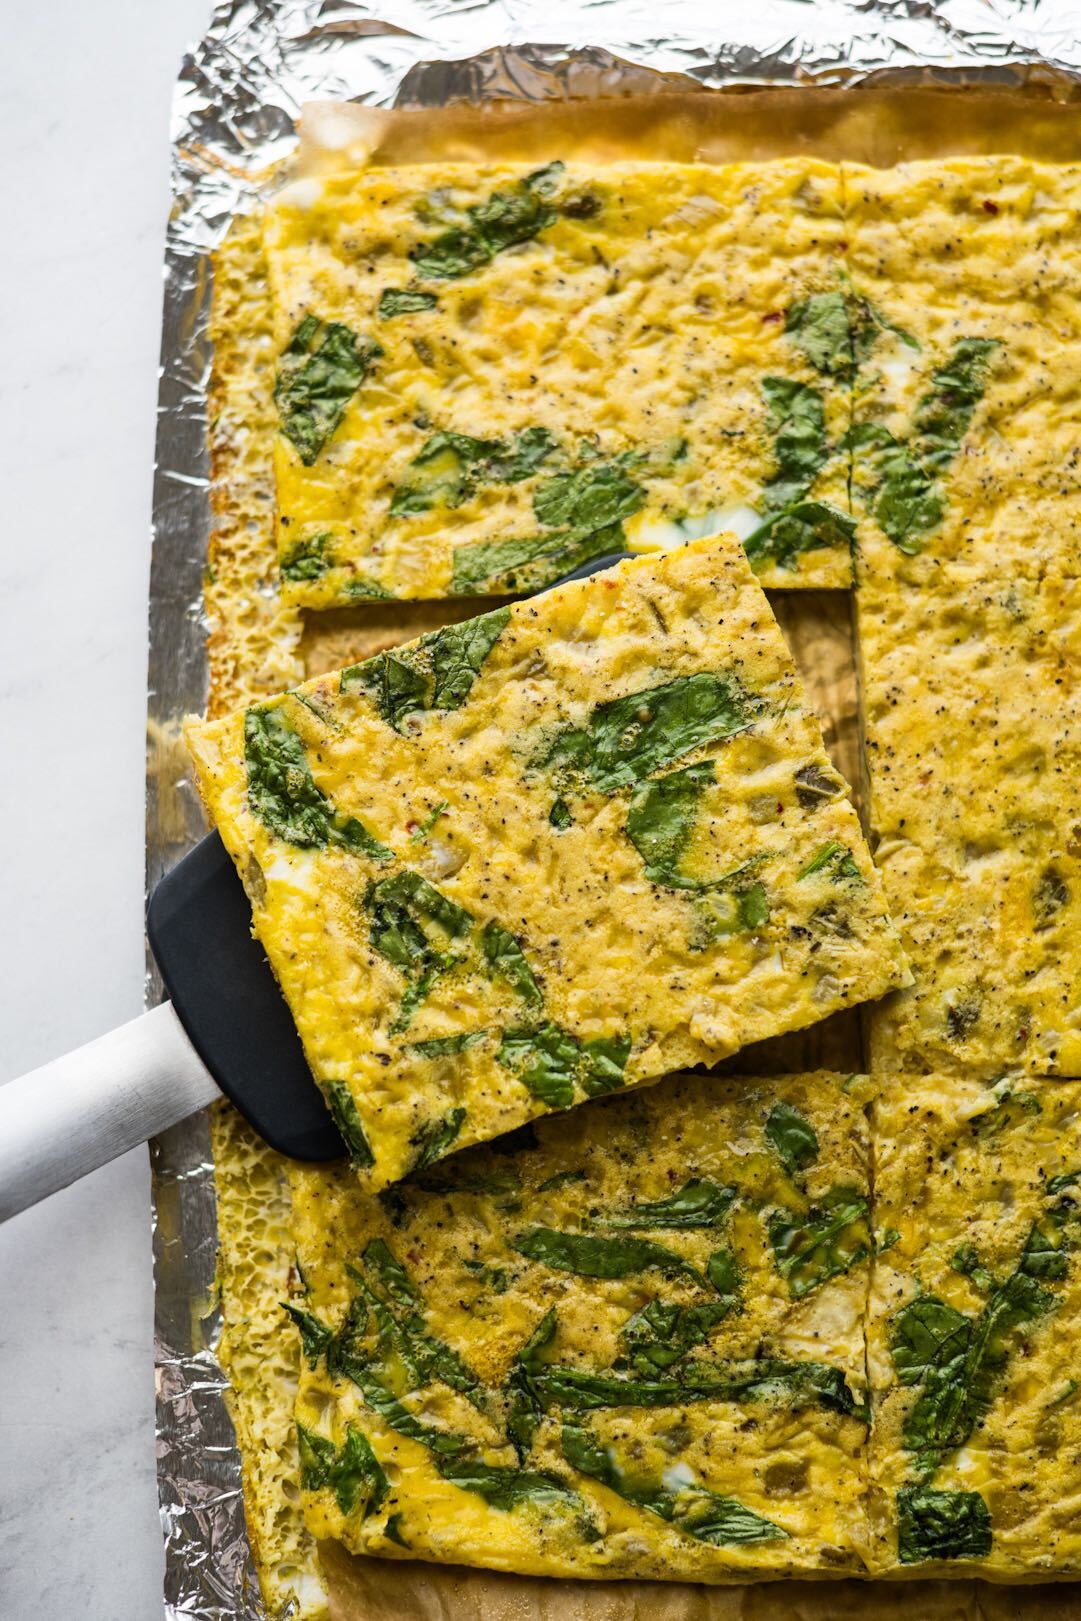 Remove from the oven and allow to cool for 5 minutes before slicing the eggs into 12 squares. | peteandgerrys.com